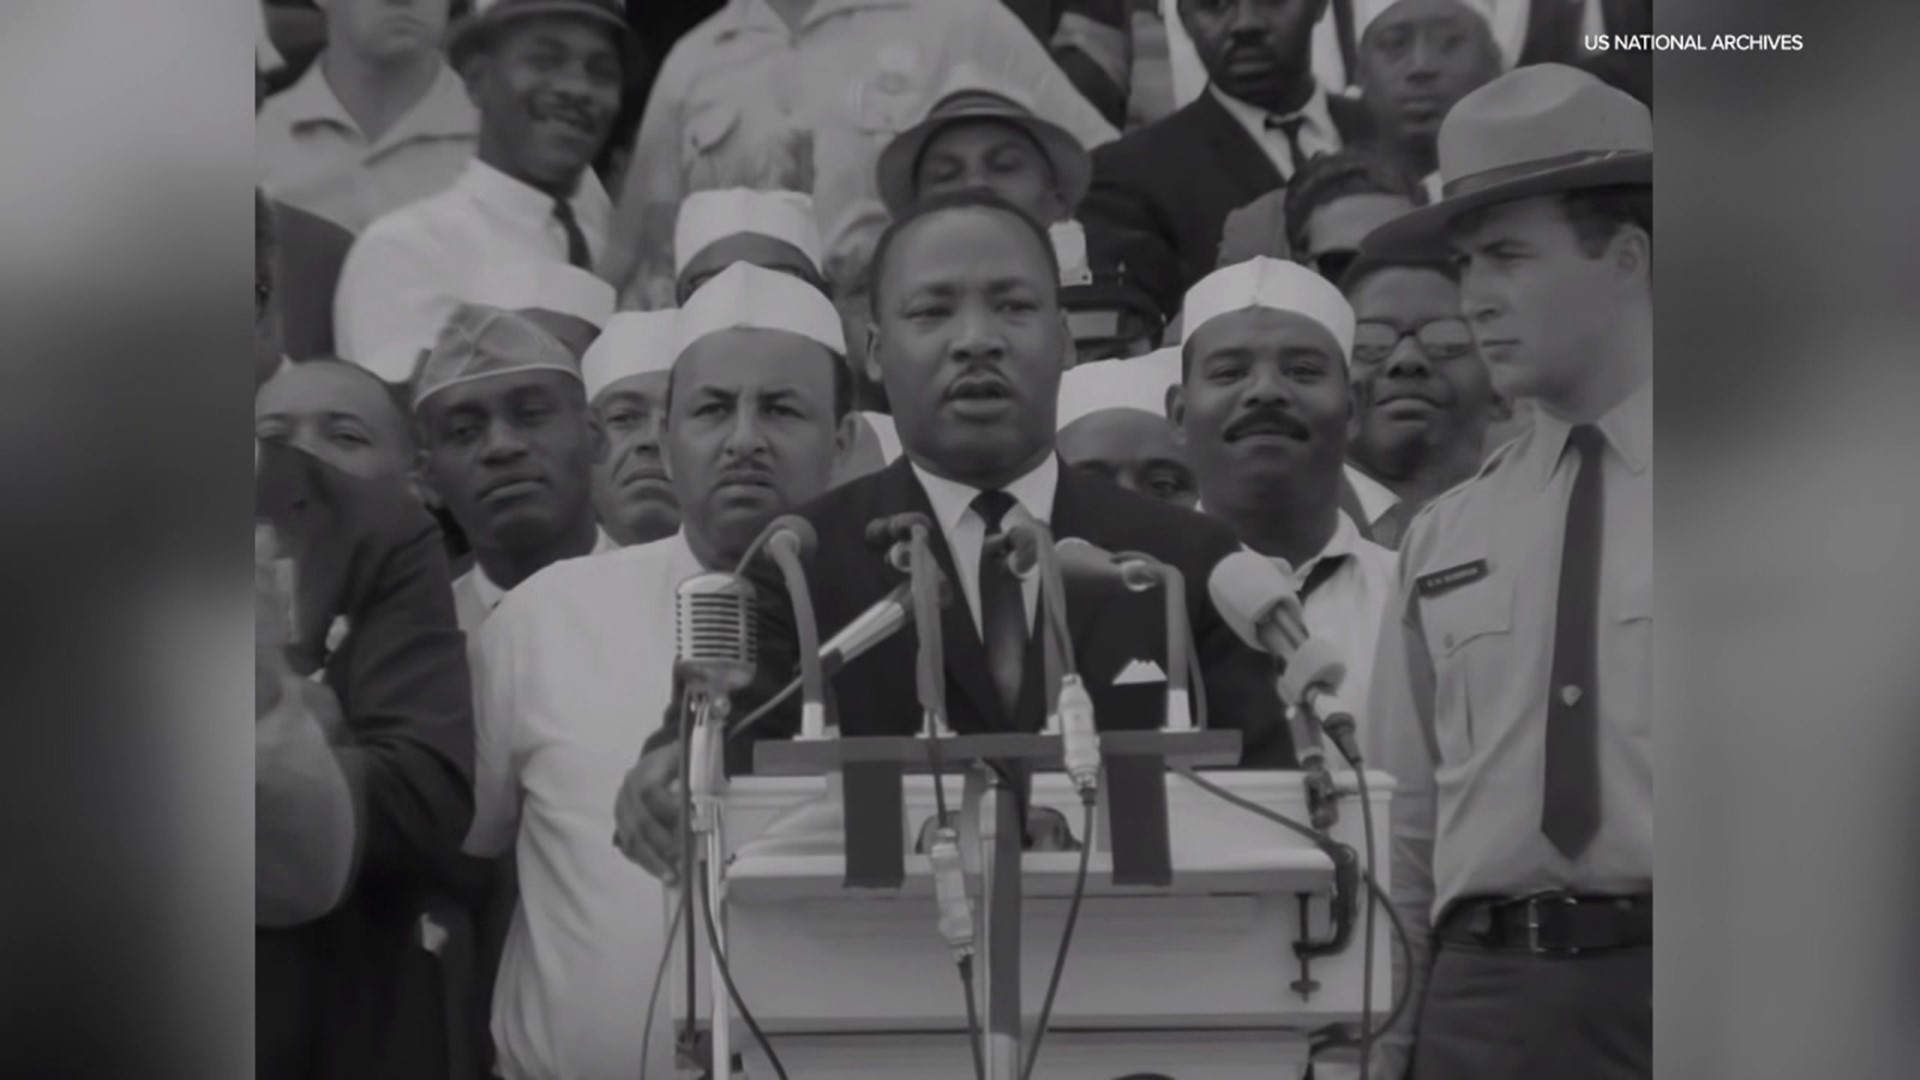 Doctor Martin Luther King Jr. made the speech on August 28th, 1963, during the March on Washington for Jobs and Freedom.